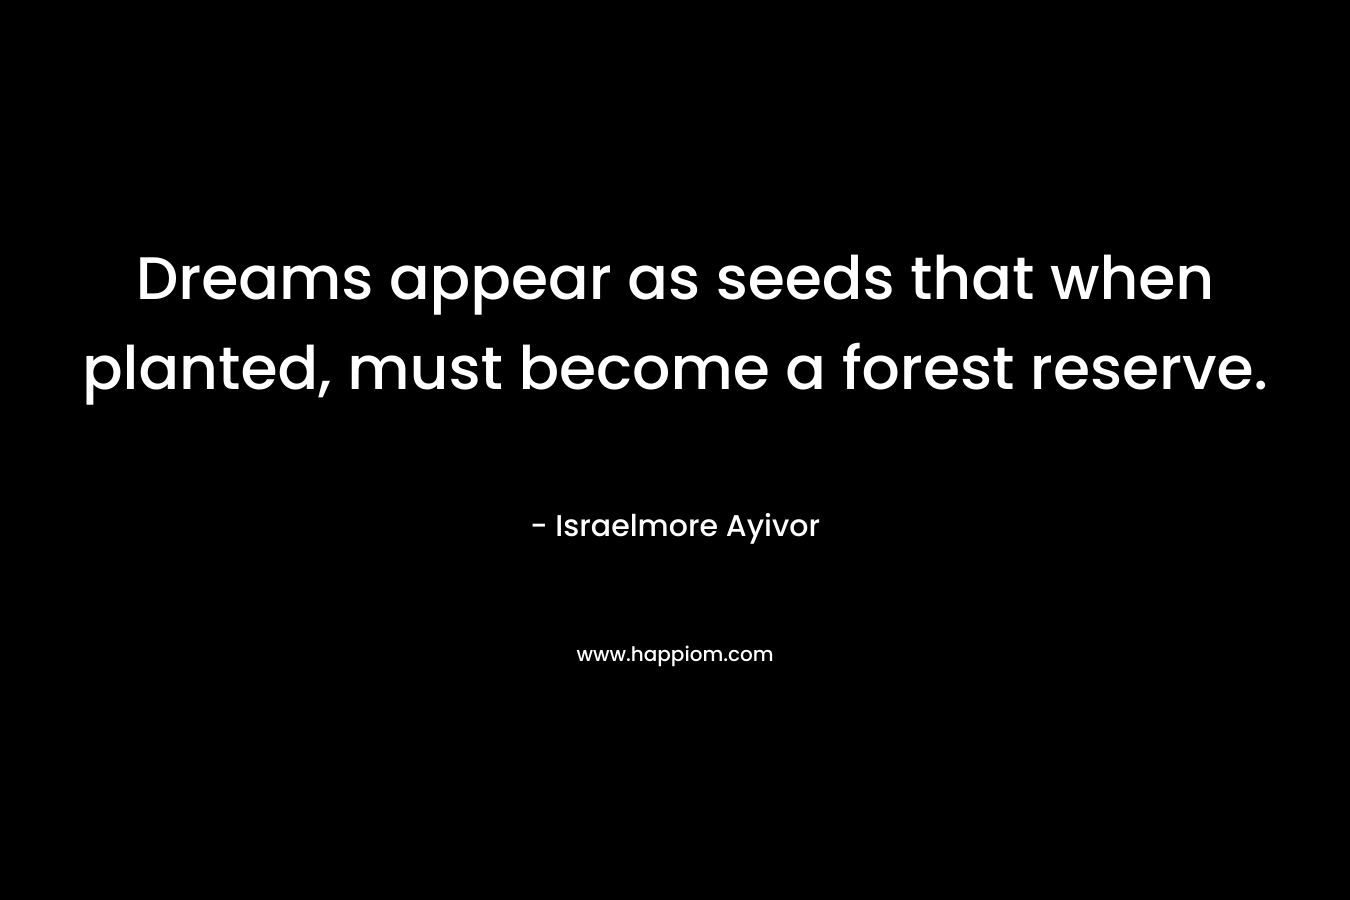 Dreams appear as seeds that when planted, must become a forest reserve.